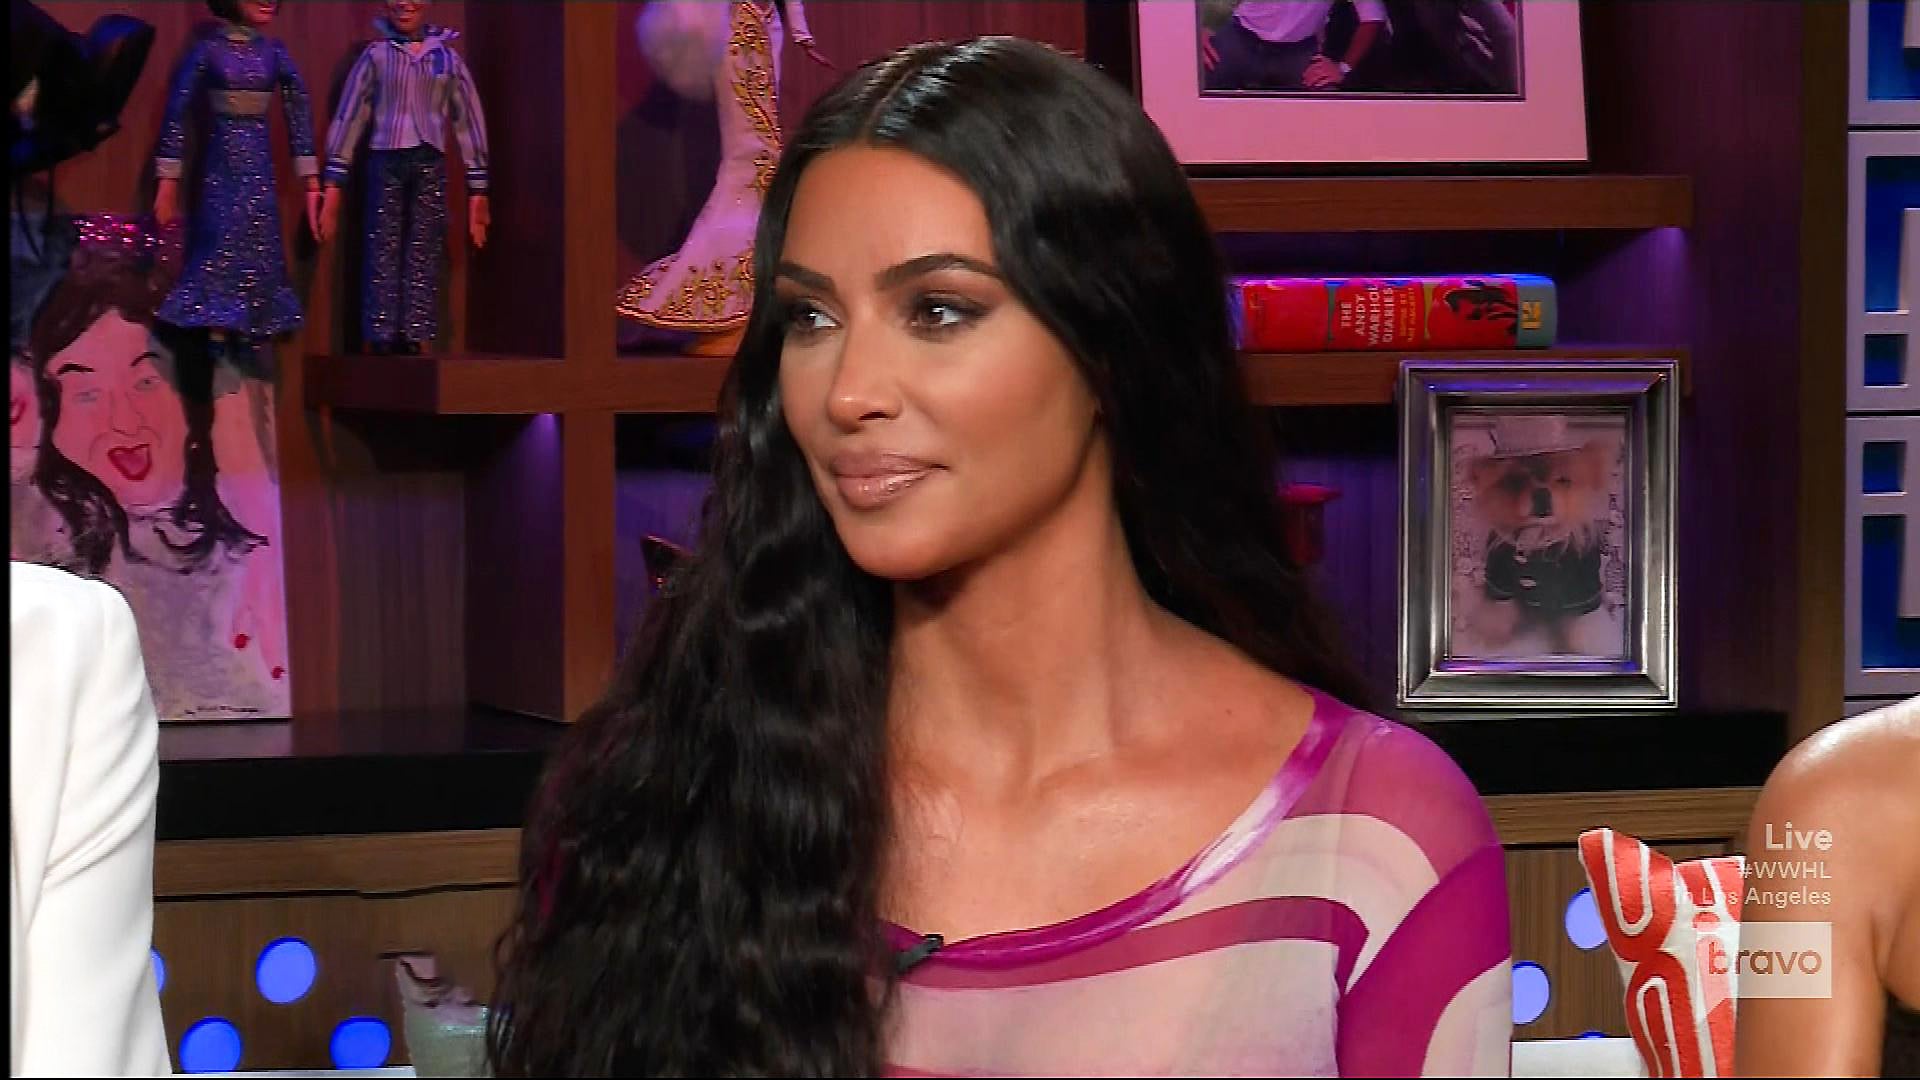 Kim Kardashian On How Shell Address Her Sex Tape With Kids North, Chicago, Saint West Entertainment Tonight hq nude picture